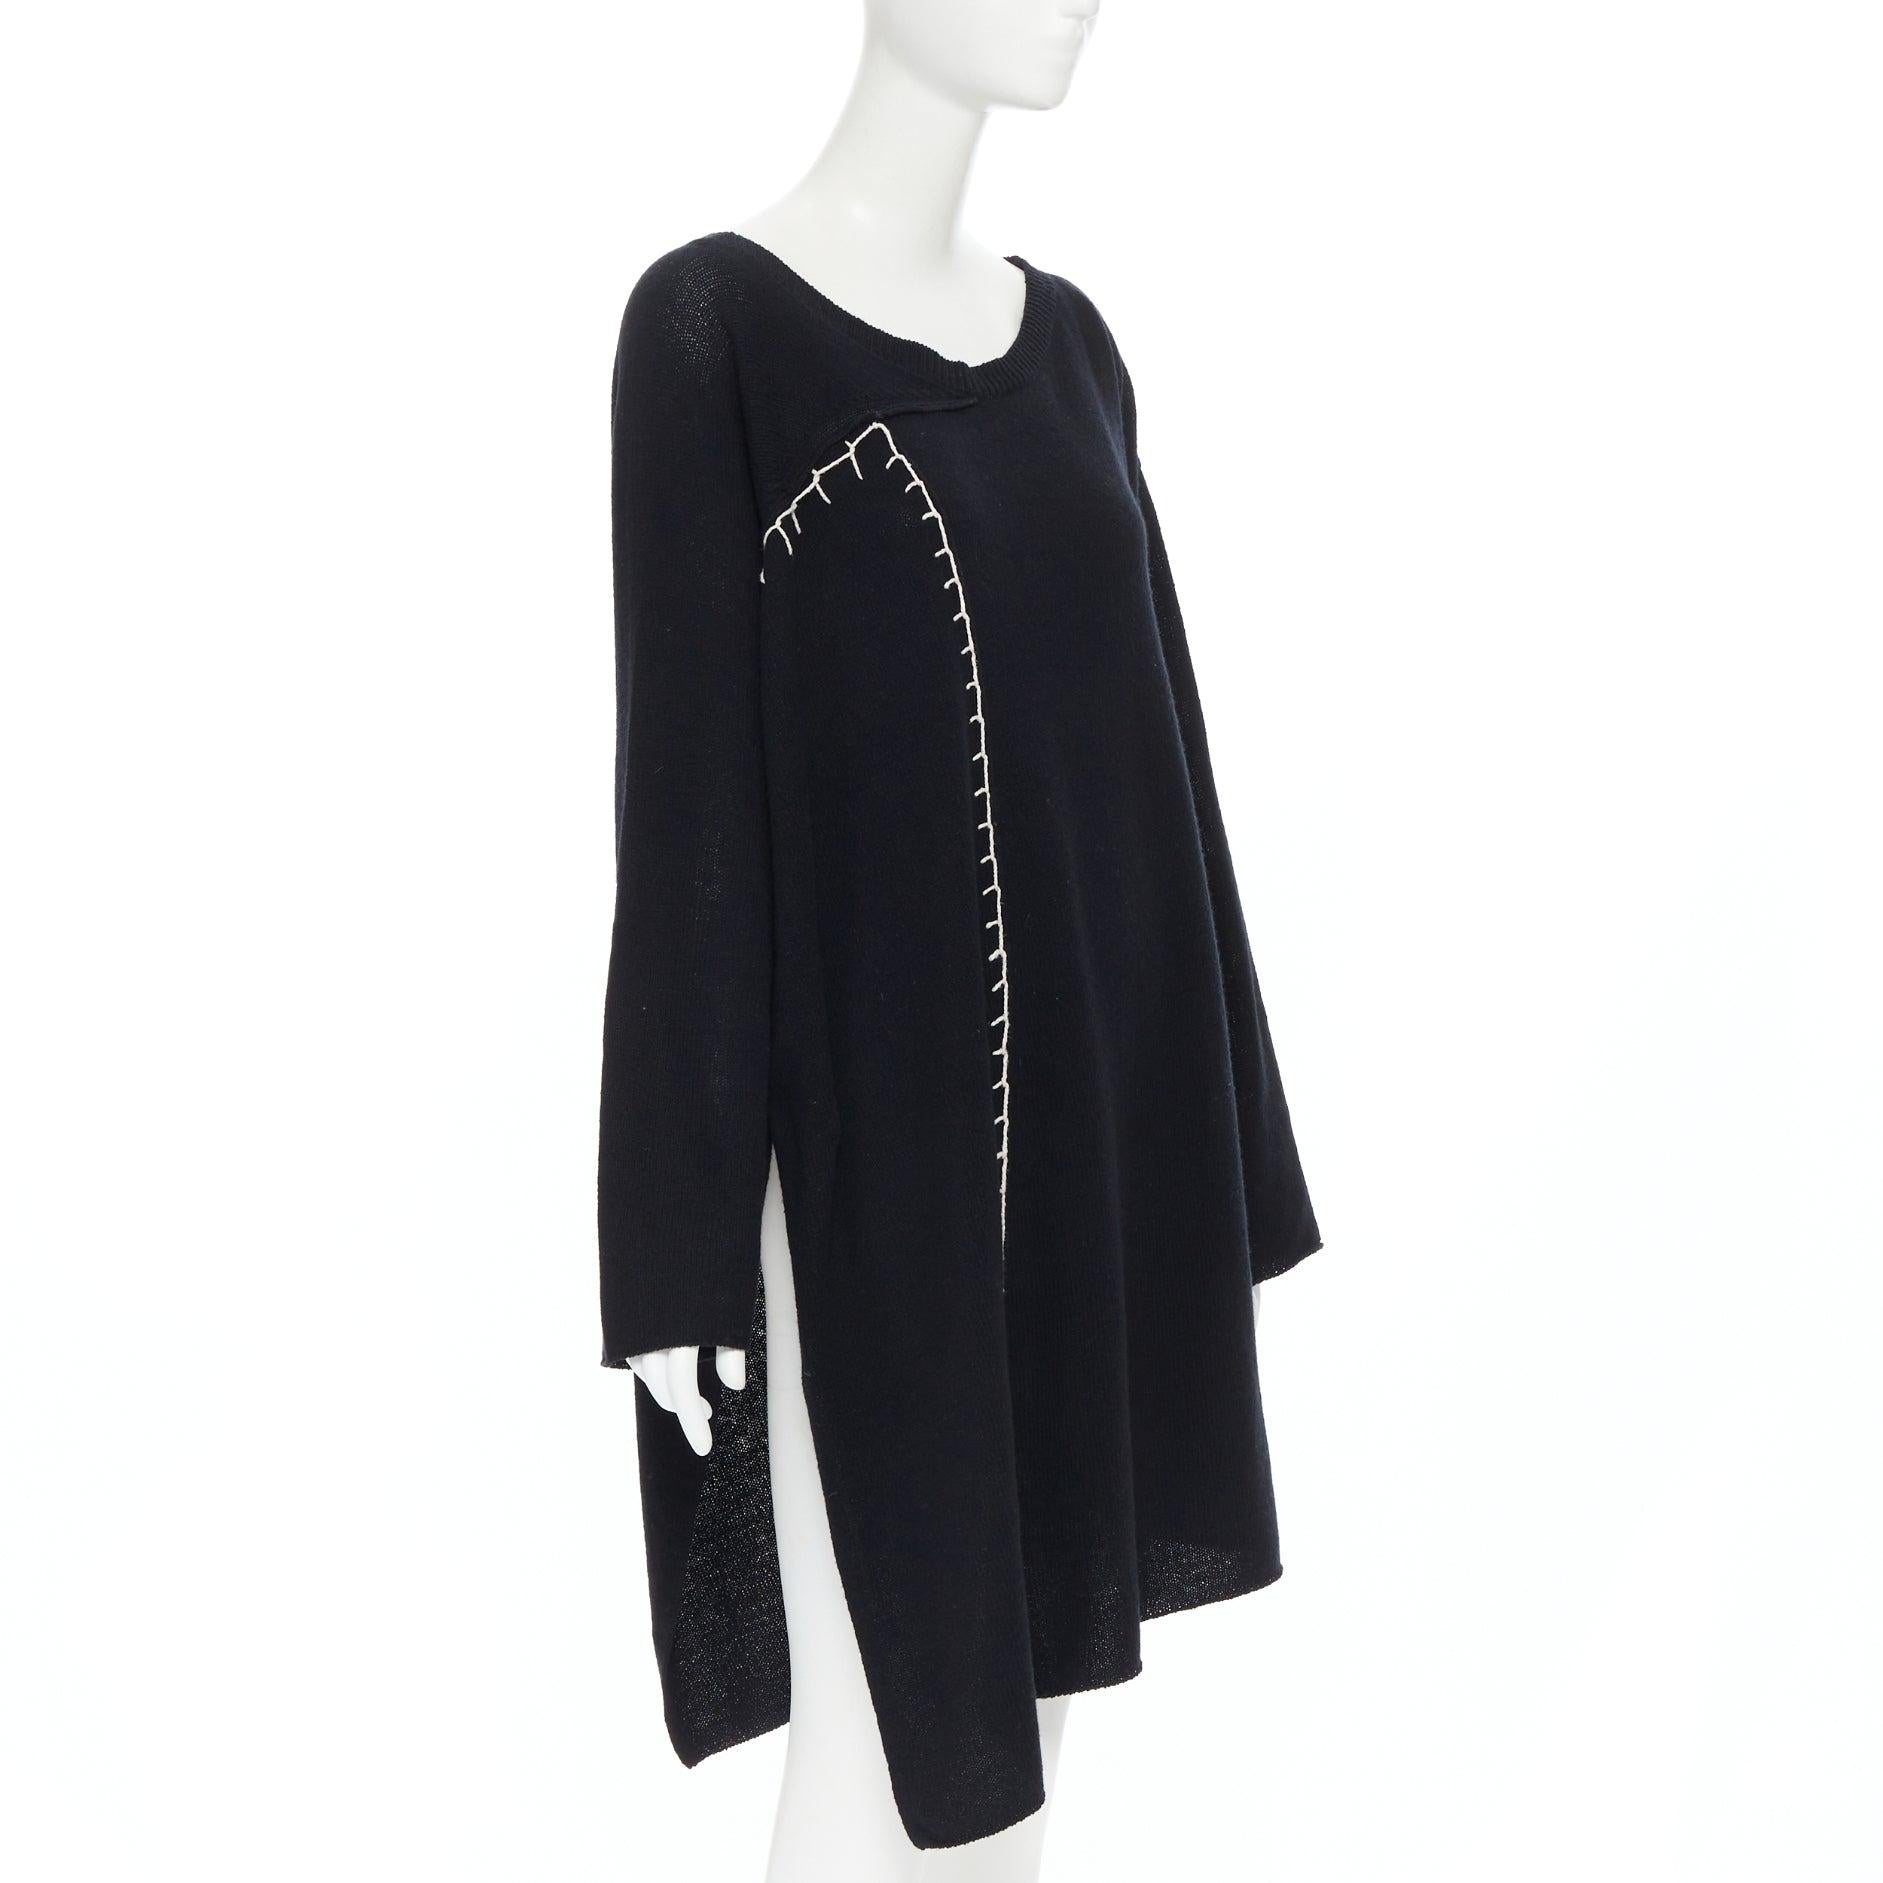 YOHJI YAMAMOTO black wool cotton white whipstitch open side tunic sweater JP2
Reference: AEMA/A00032
Brand: Yohji Yamamoto
Designer: Yohji Yamamoto
Material: Wool
Color: Black
Pattern: Solid
Extra Details: Whipstitch detail. Scoop neck. Slit on